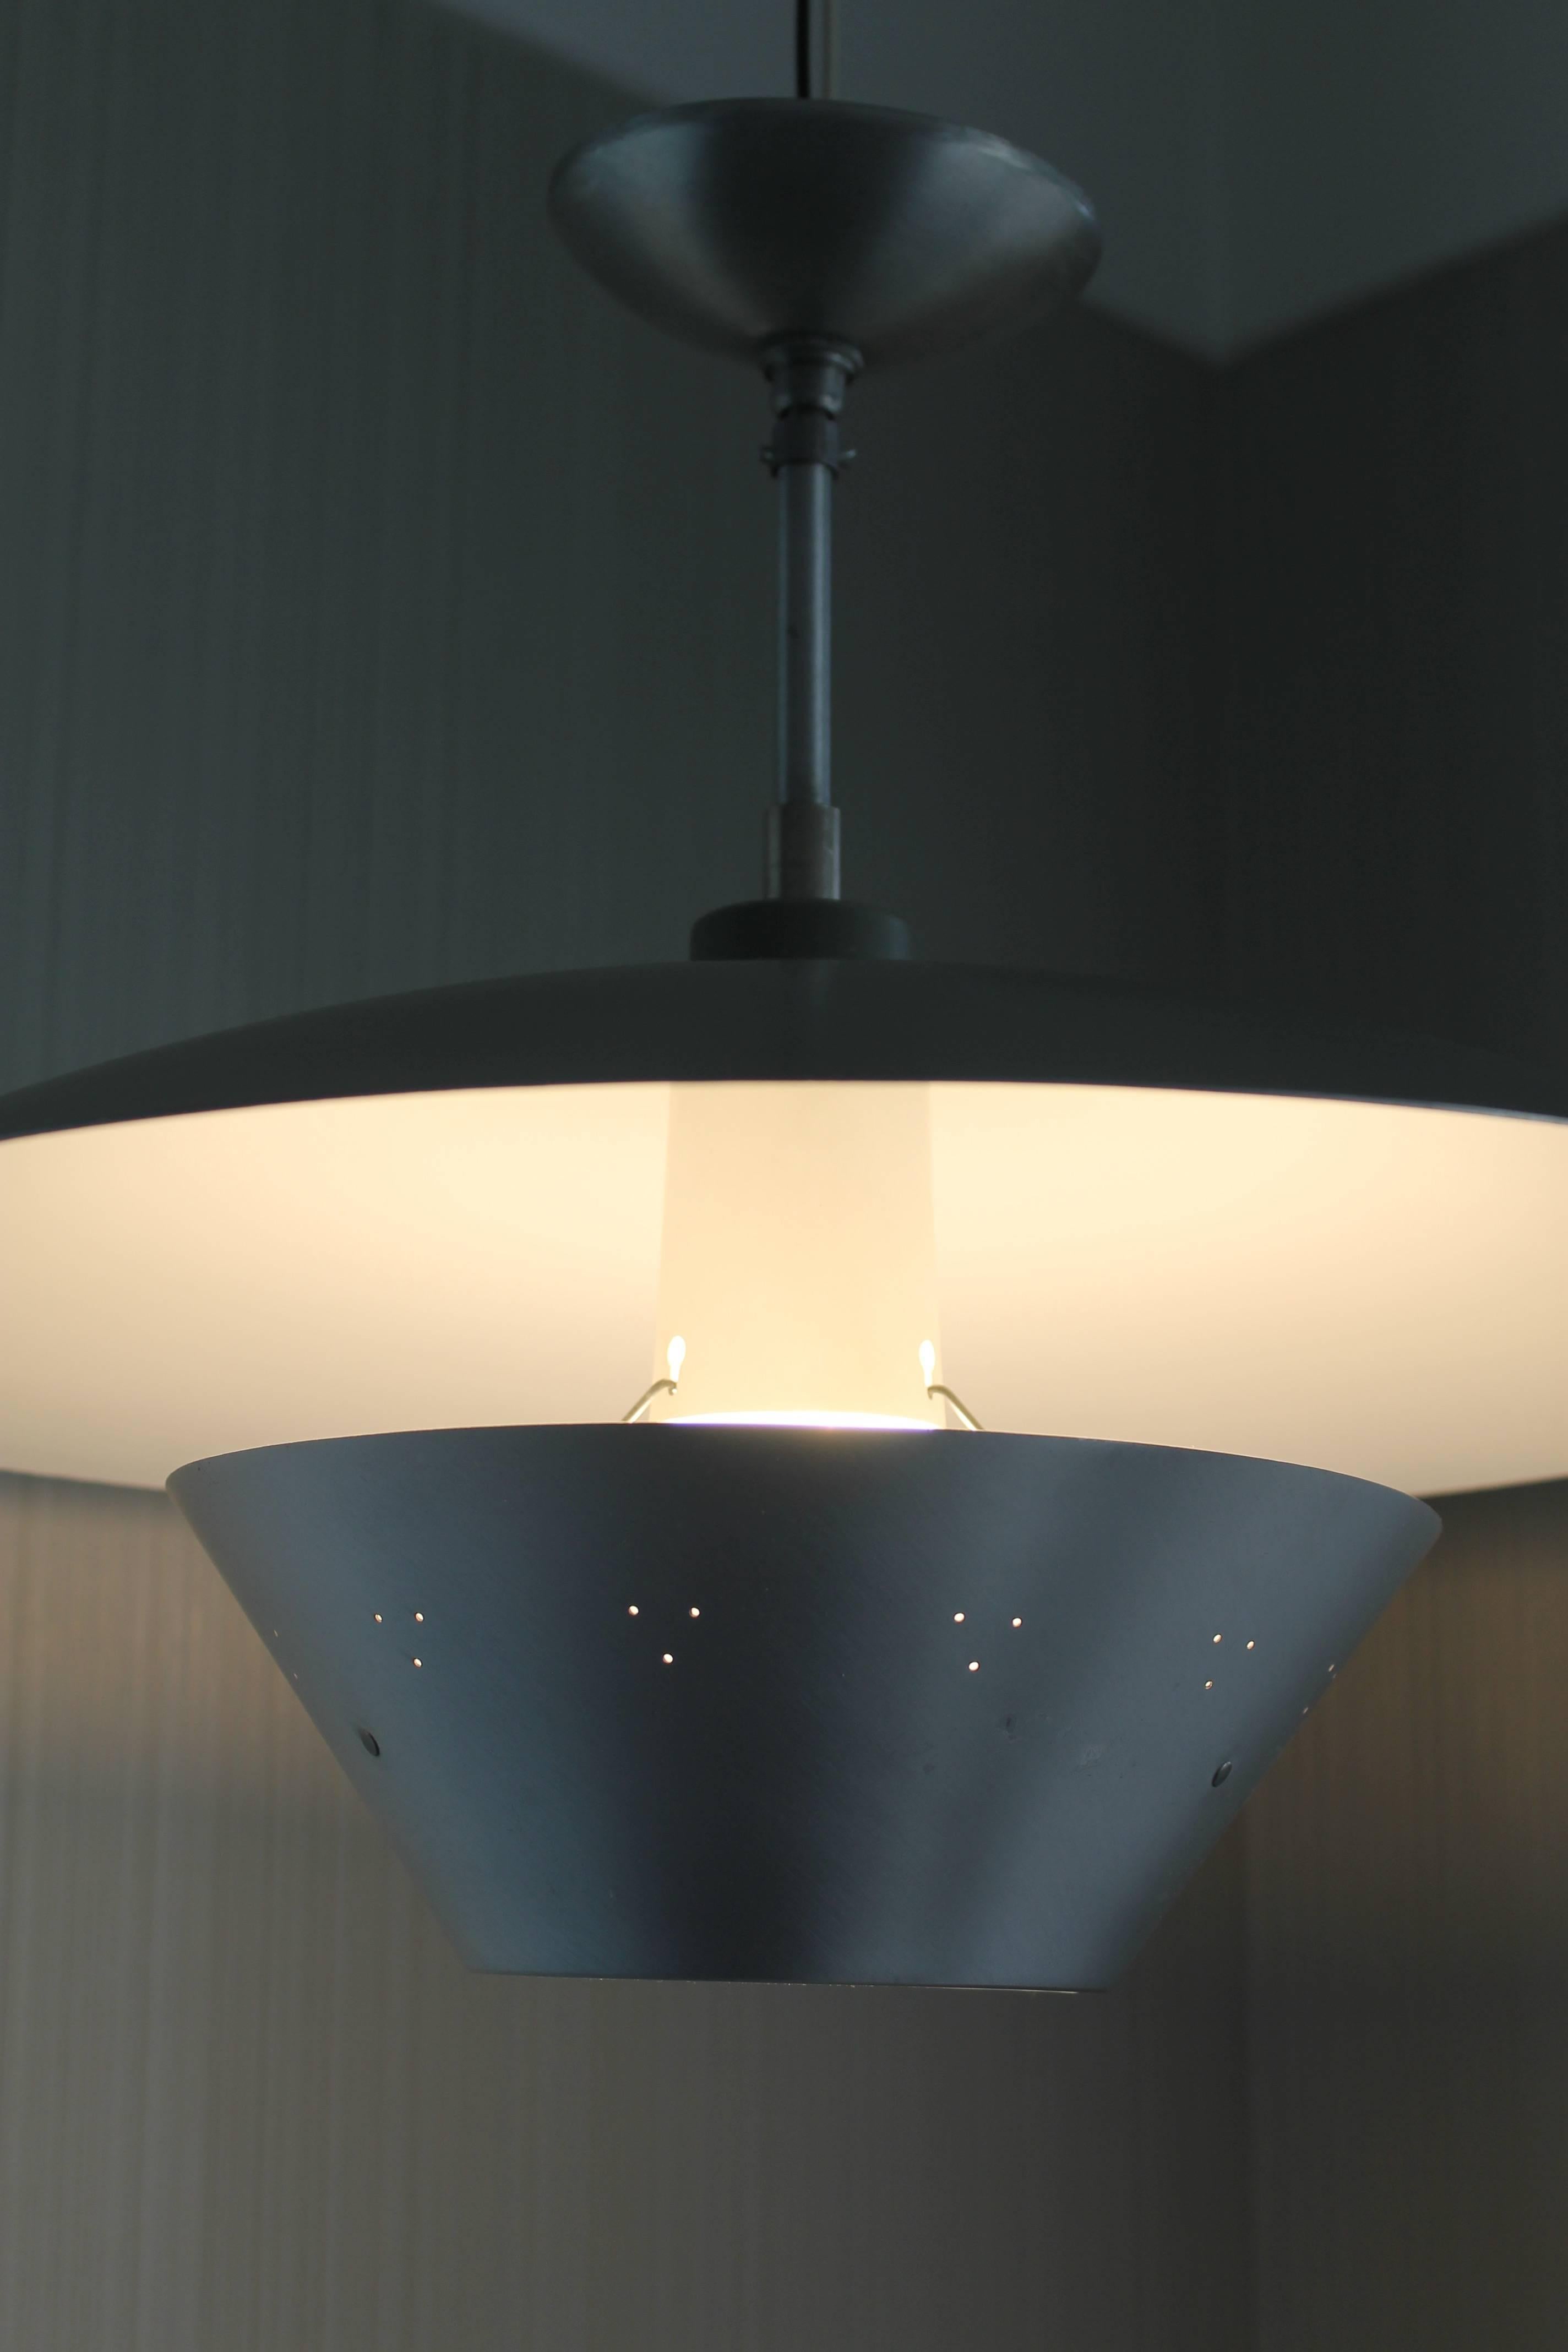 A spun aluminium saucer shaped hanging fixture, circa 1950s. The pierced lower dish directs light up into the (white) underside of the large saucer shade. Upper surface of the saucer is painted grey. Fixture includes the original spun aluminium